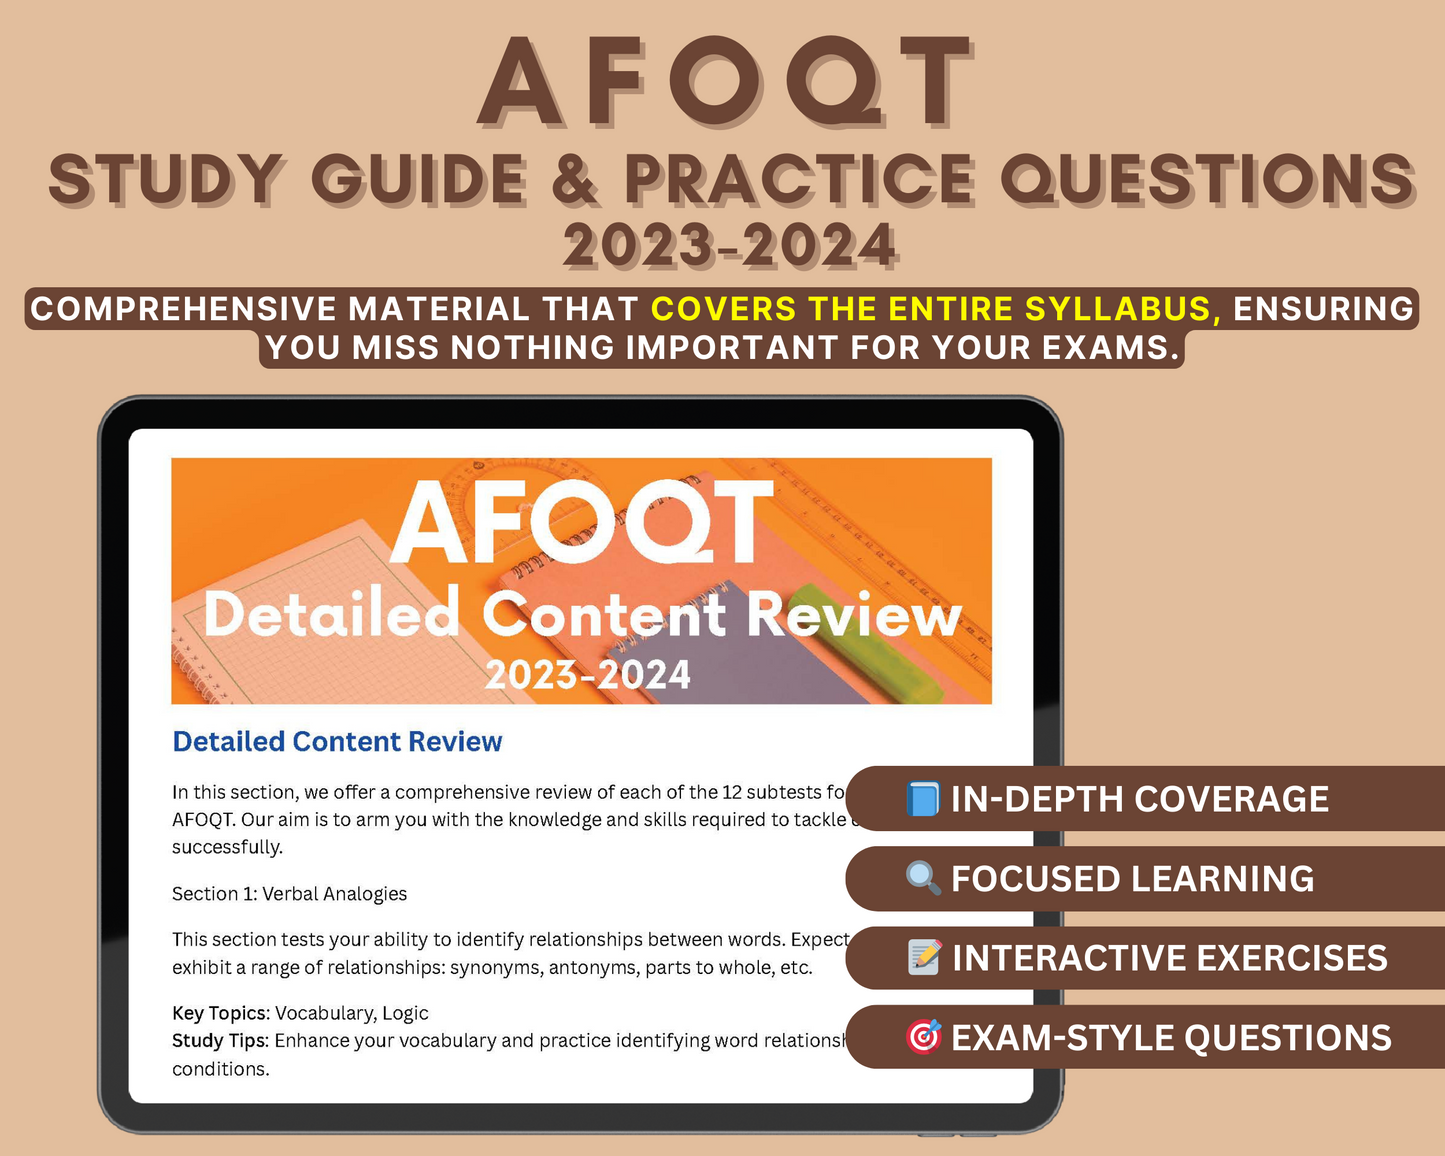 AFOQT Exam Study Guide 2023-2024: Complete Air Force Officer Qualifying Test Prep with Practice Tests & Exam Strategies